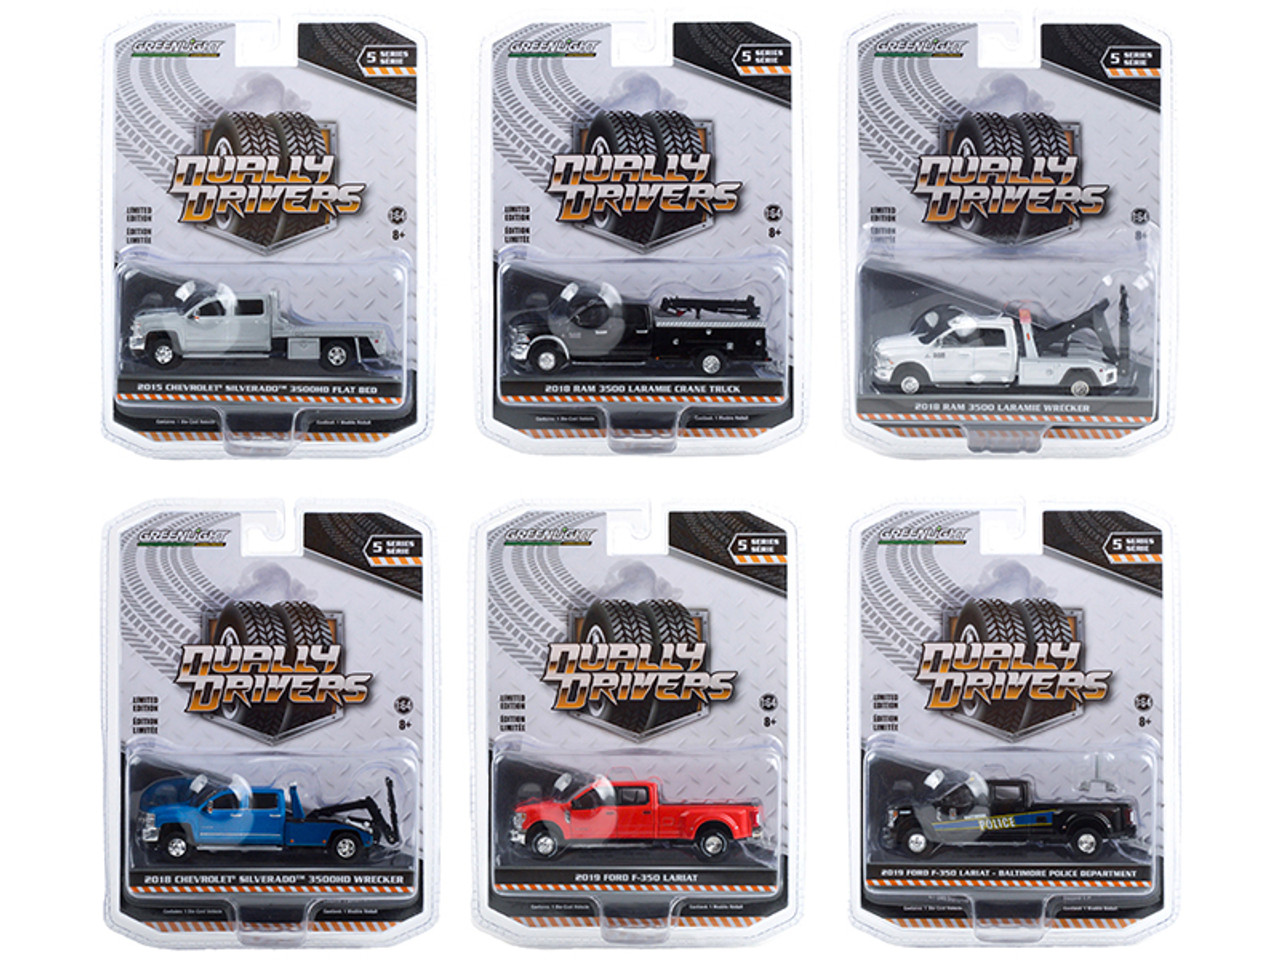 "Dually Drivers" Set of 6 Trucks Series 5 1/64 Diecast Model Cars by Greenlight